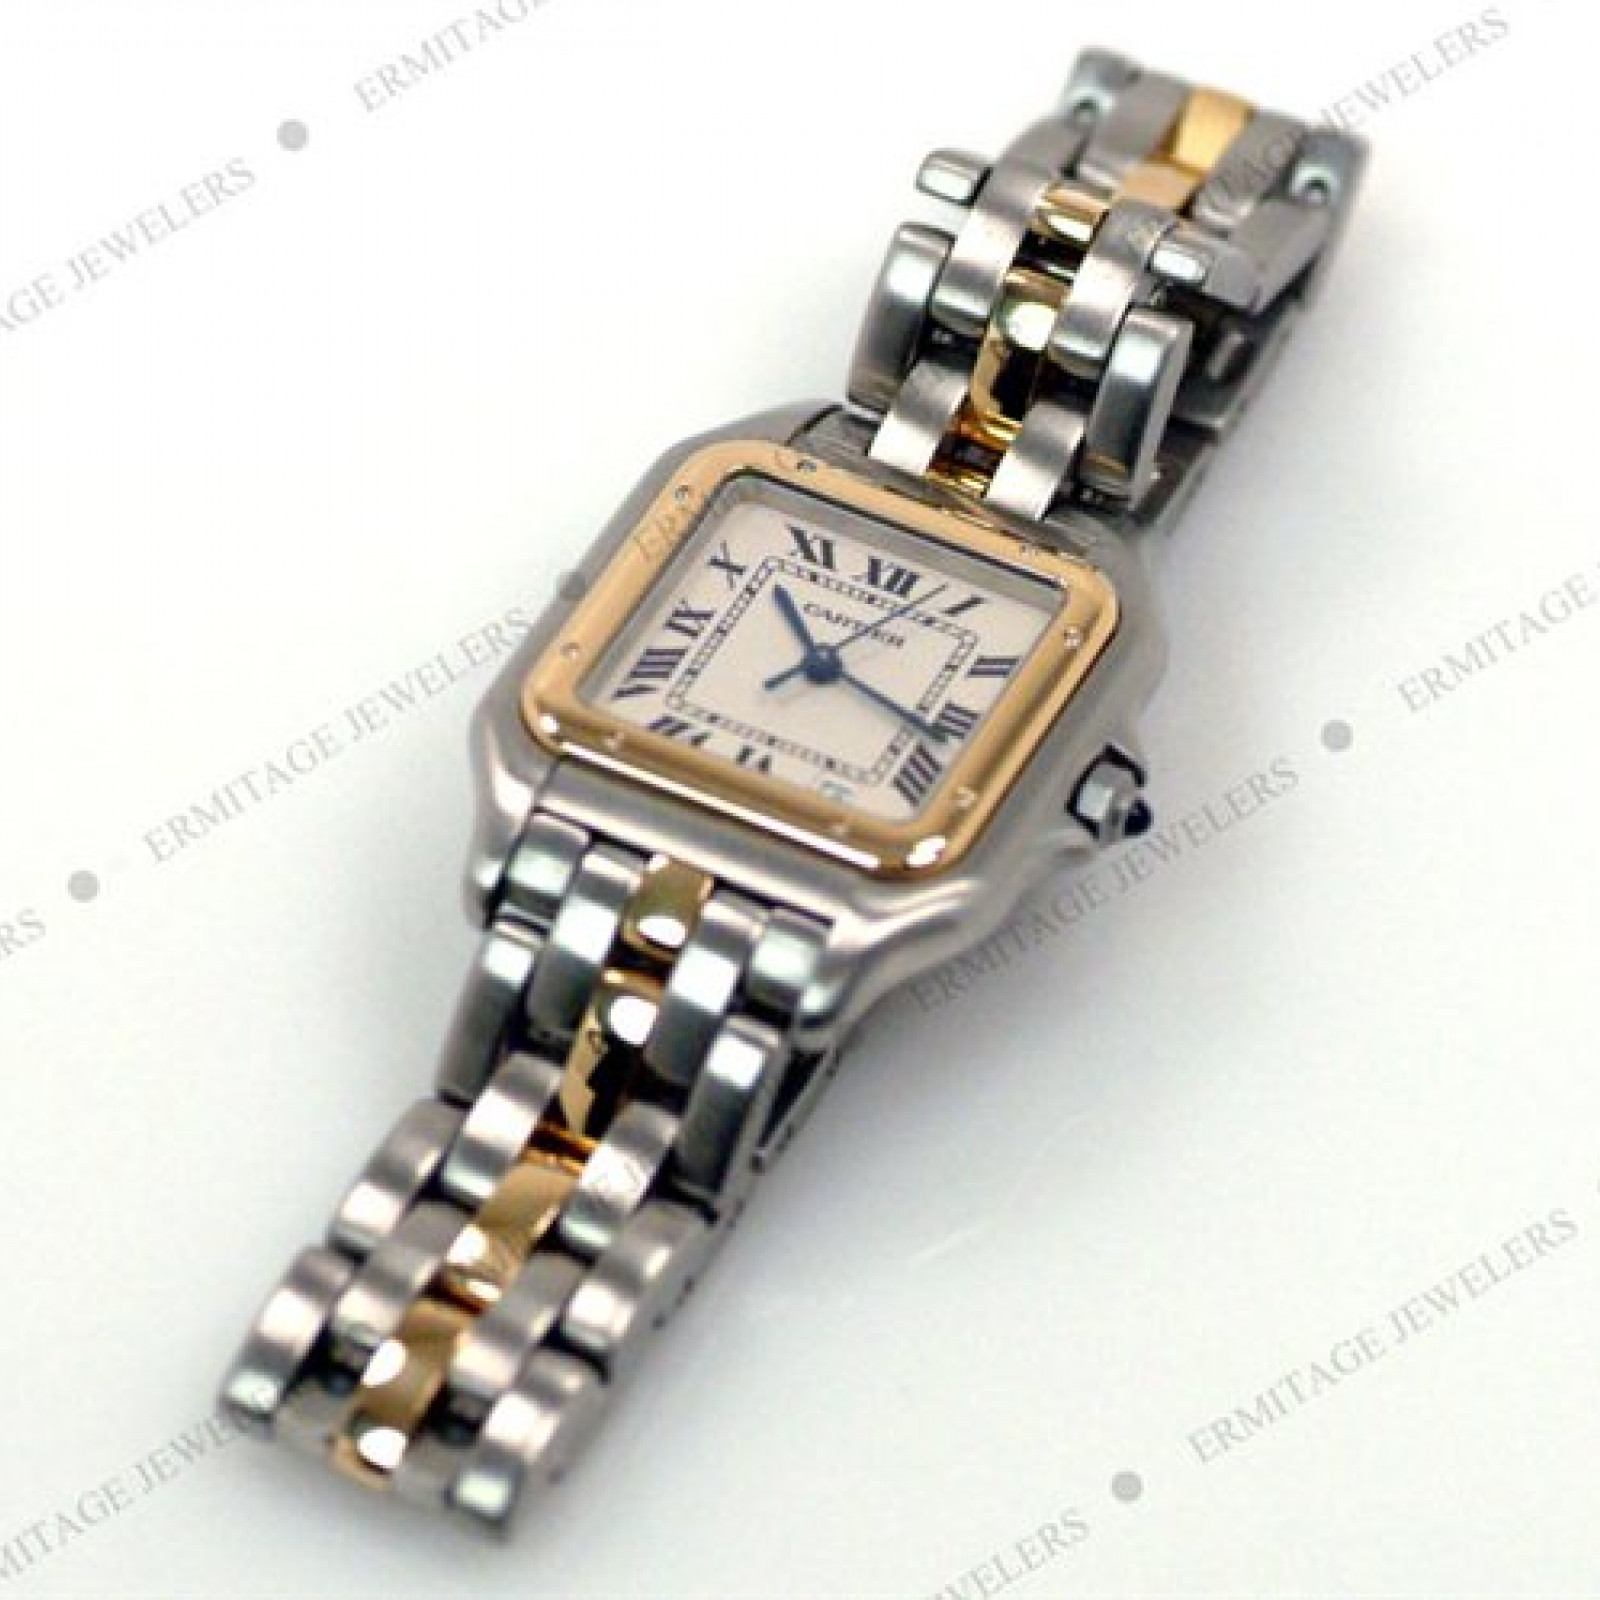 Cartier Tank Panthere 8299 Gold & Steel